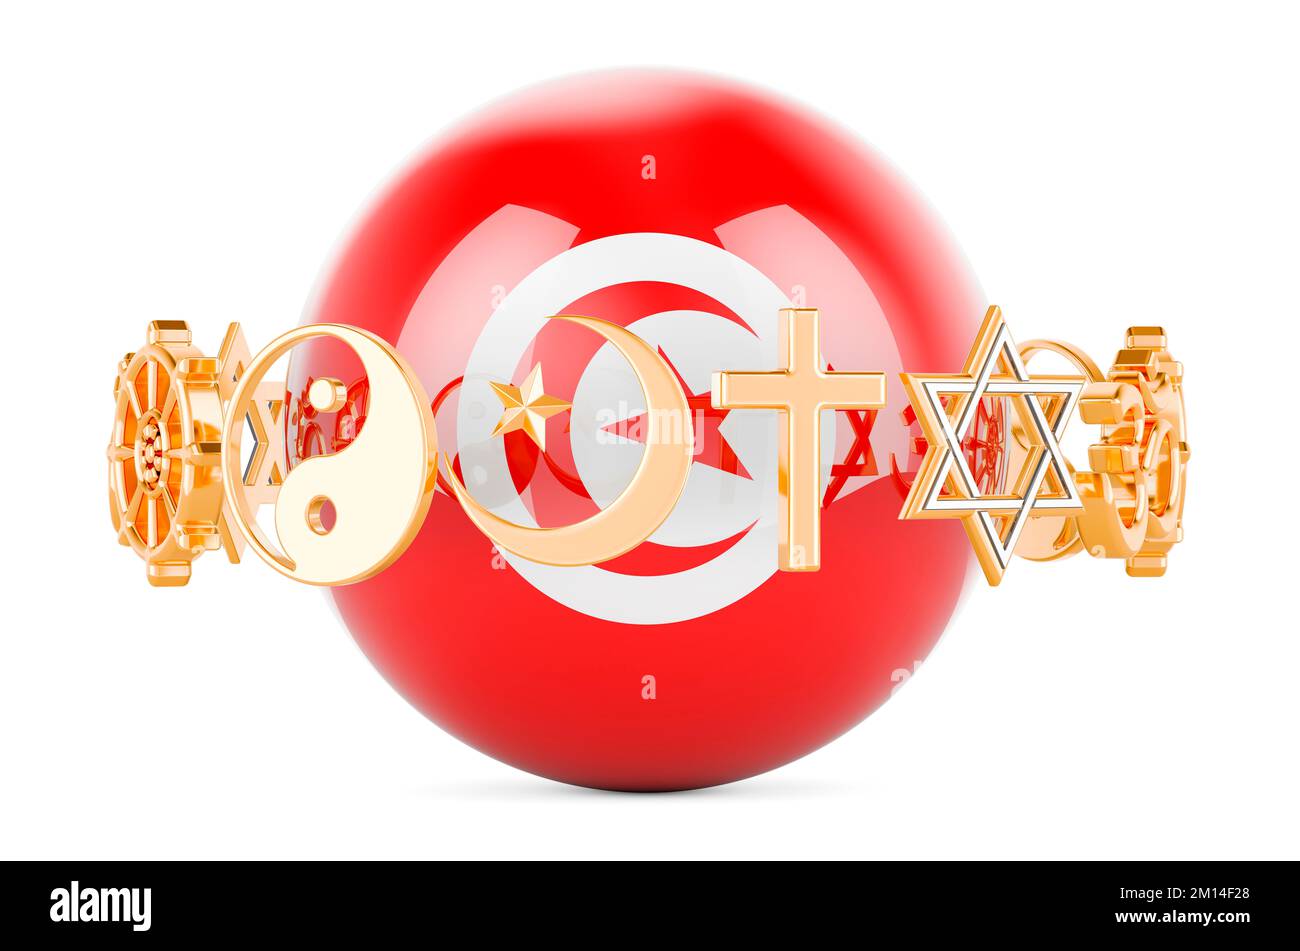 Tunisian flag painted on sphere with religions symbols around, 3D rendering isolated on white background Stock Photo